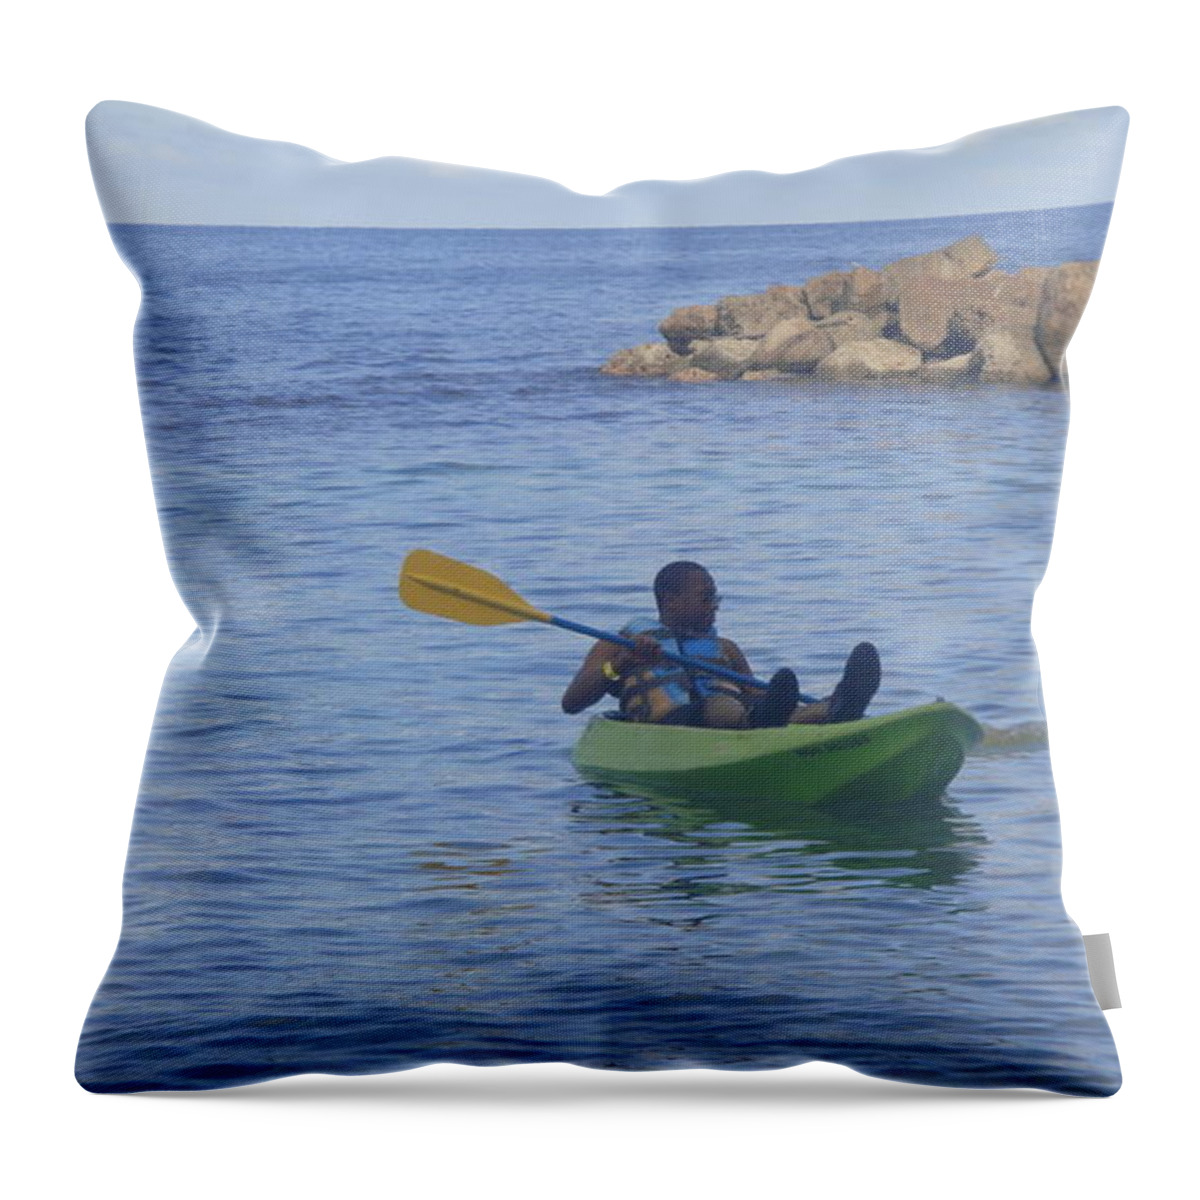 Alone On A Cruise Throw Pillow featuring the photograph Seajade by Trevor A Smith